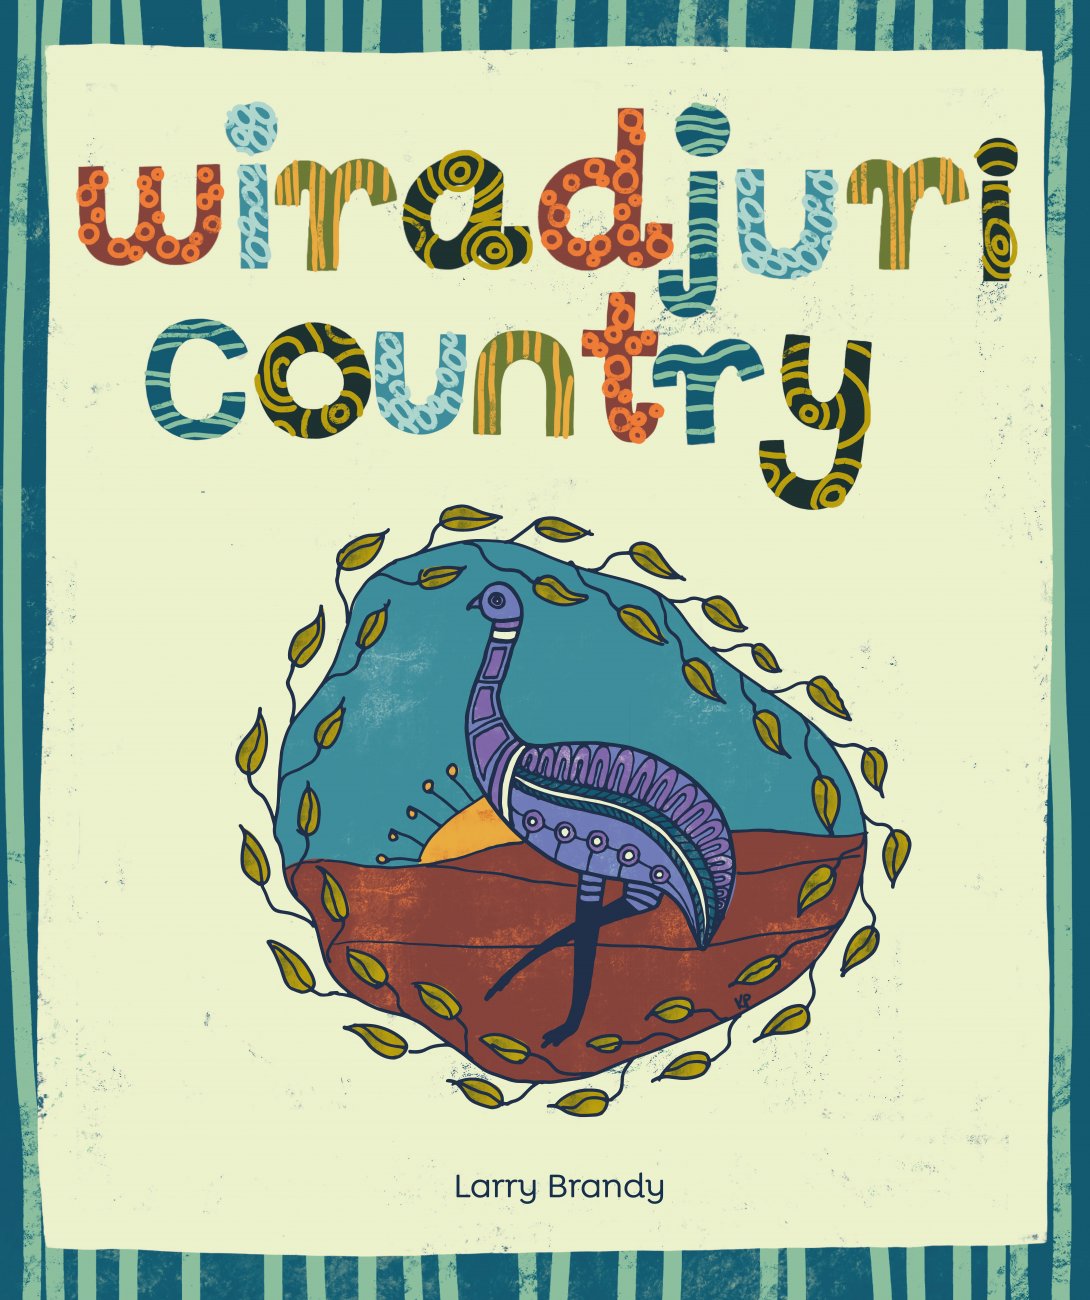 Wiradjuri Country book cover by Larry Brandy. A pale green background with a dark green striped boarder. An artistic rendition of an emu walking along red country is depicted in a circle.